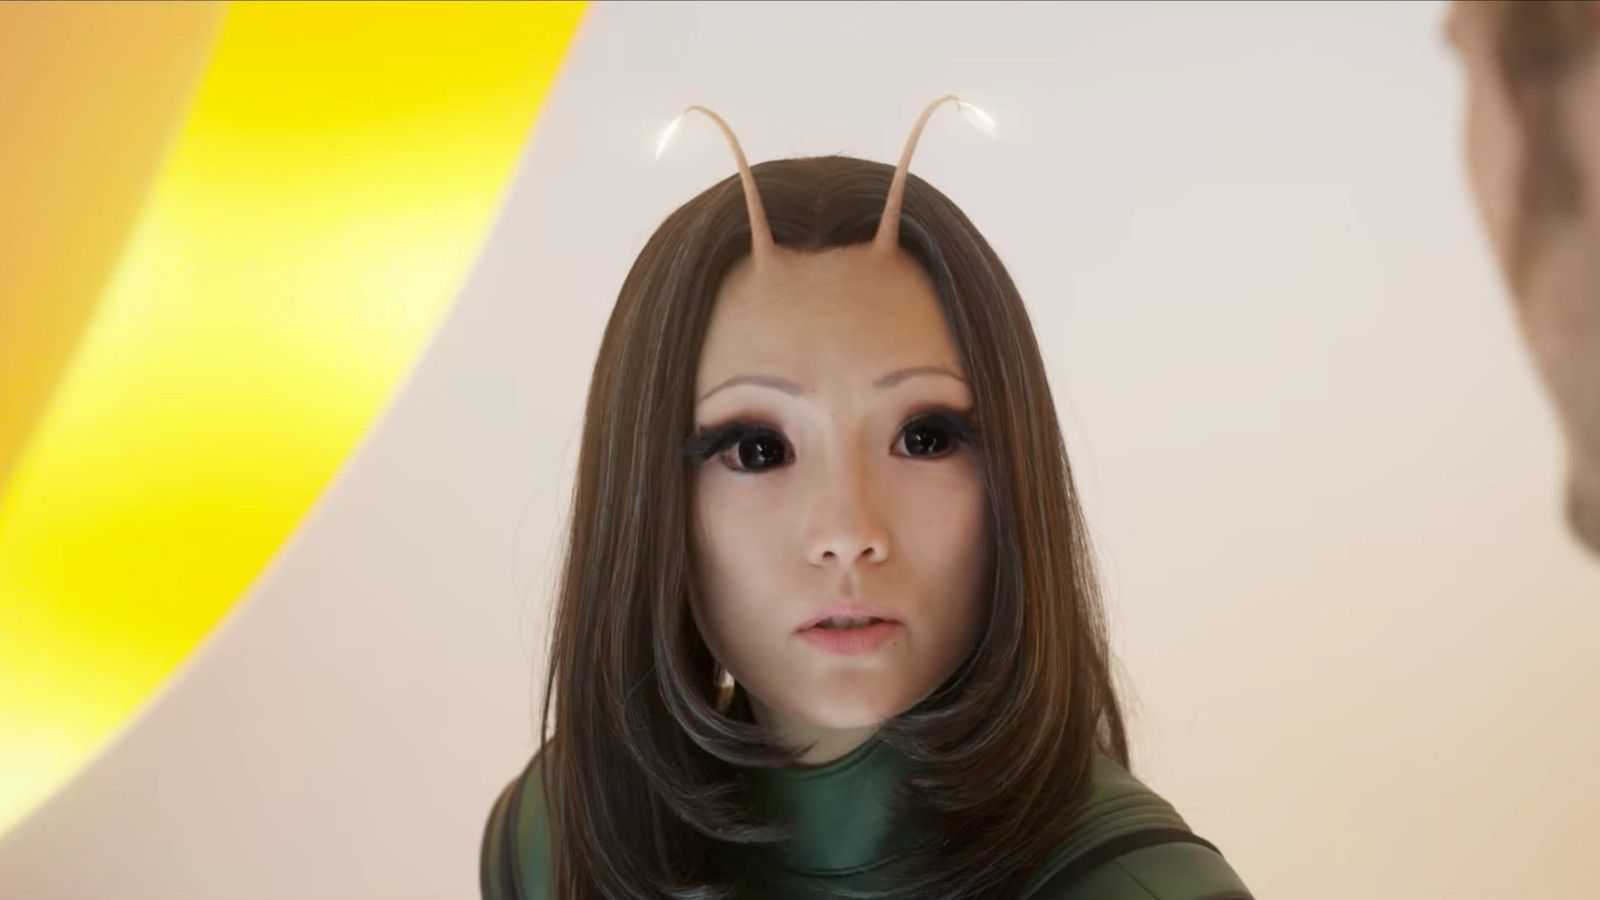 Guardians of the Galaxy Vol. 2 got Mantis all wrong, says